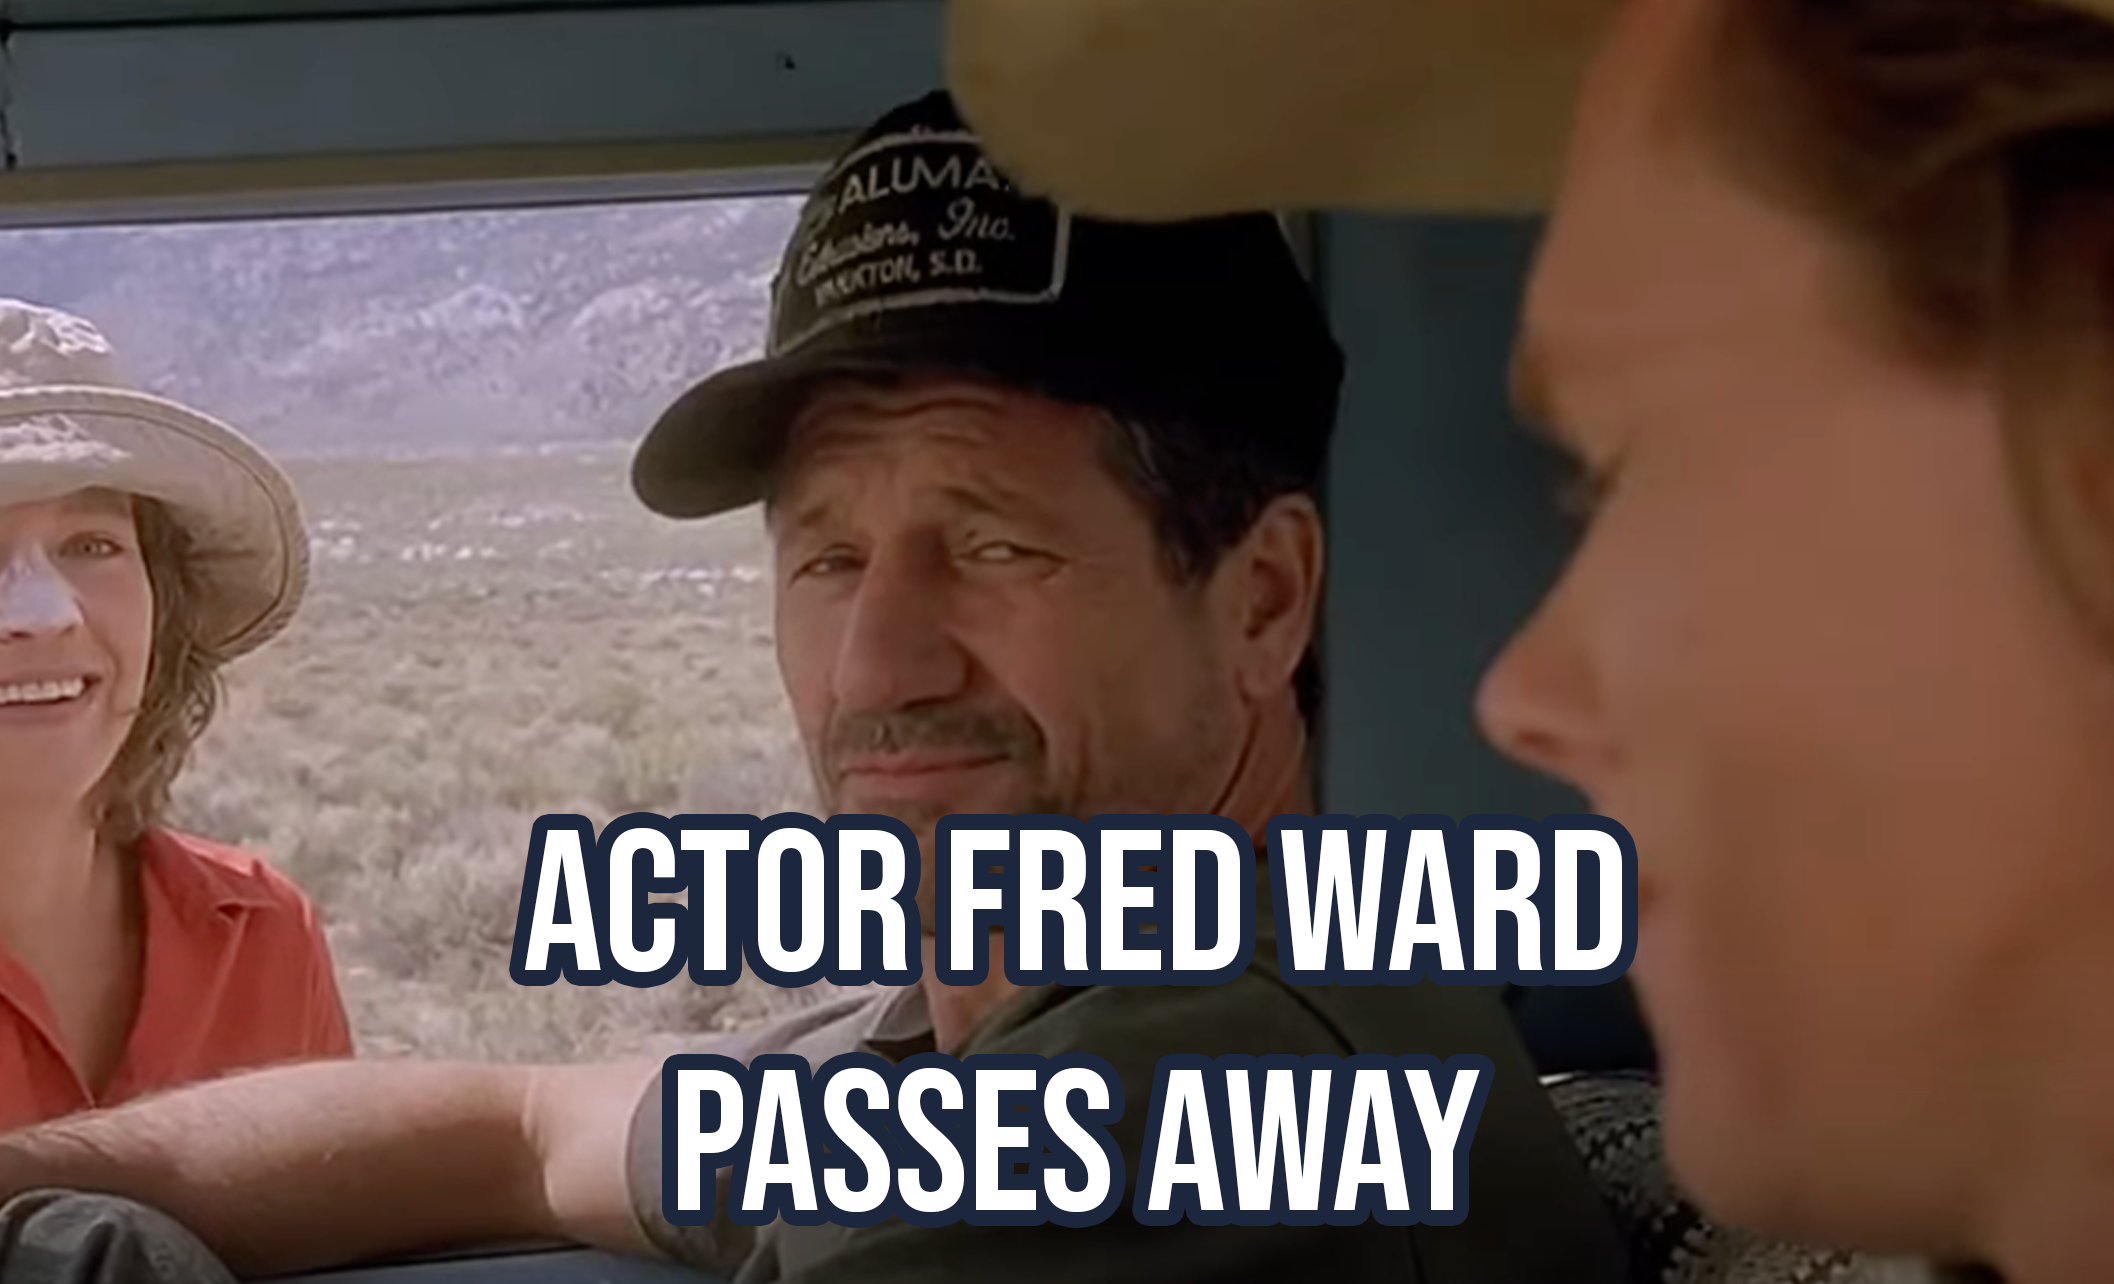 Actor Fred Ward passes away